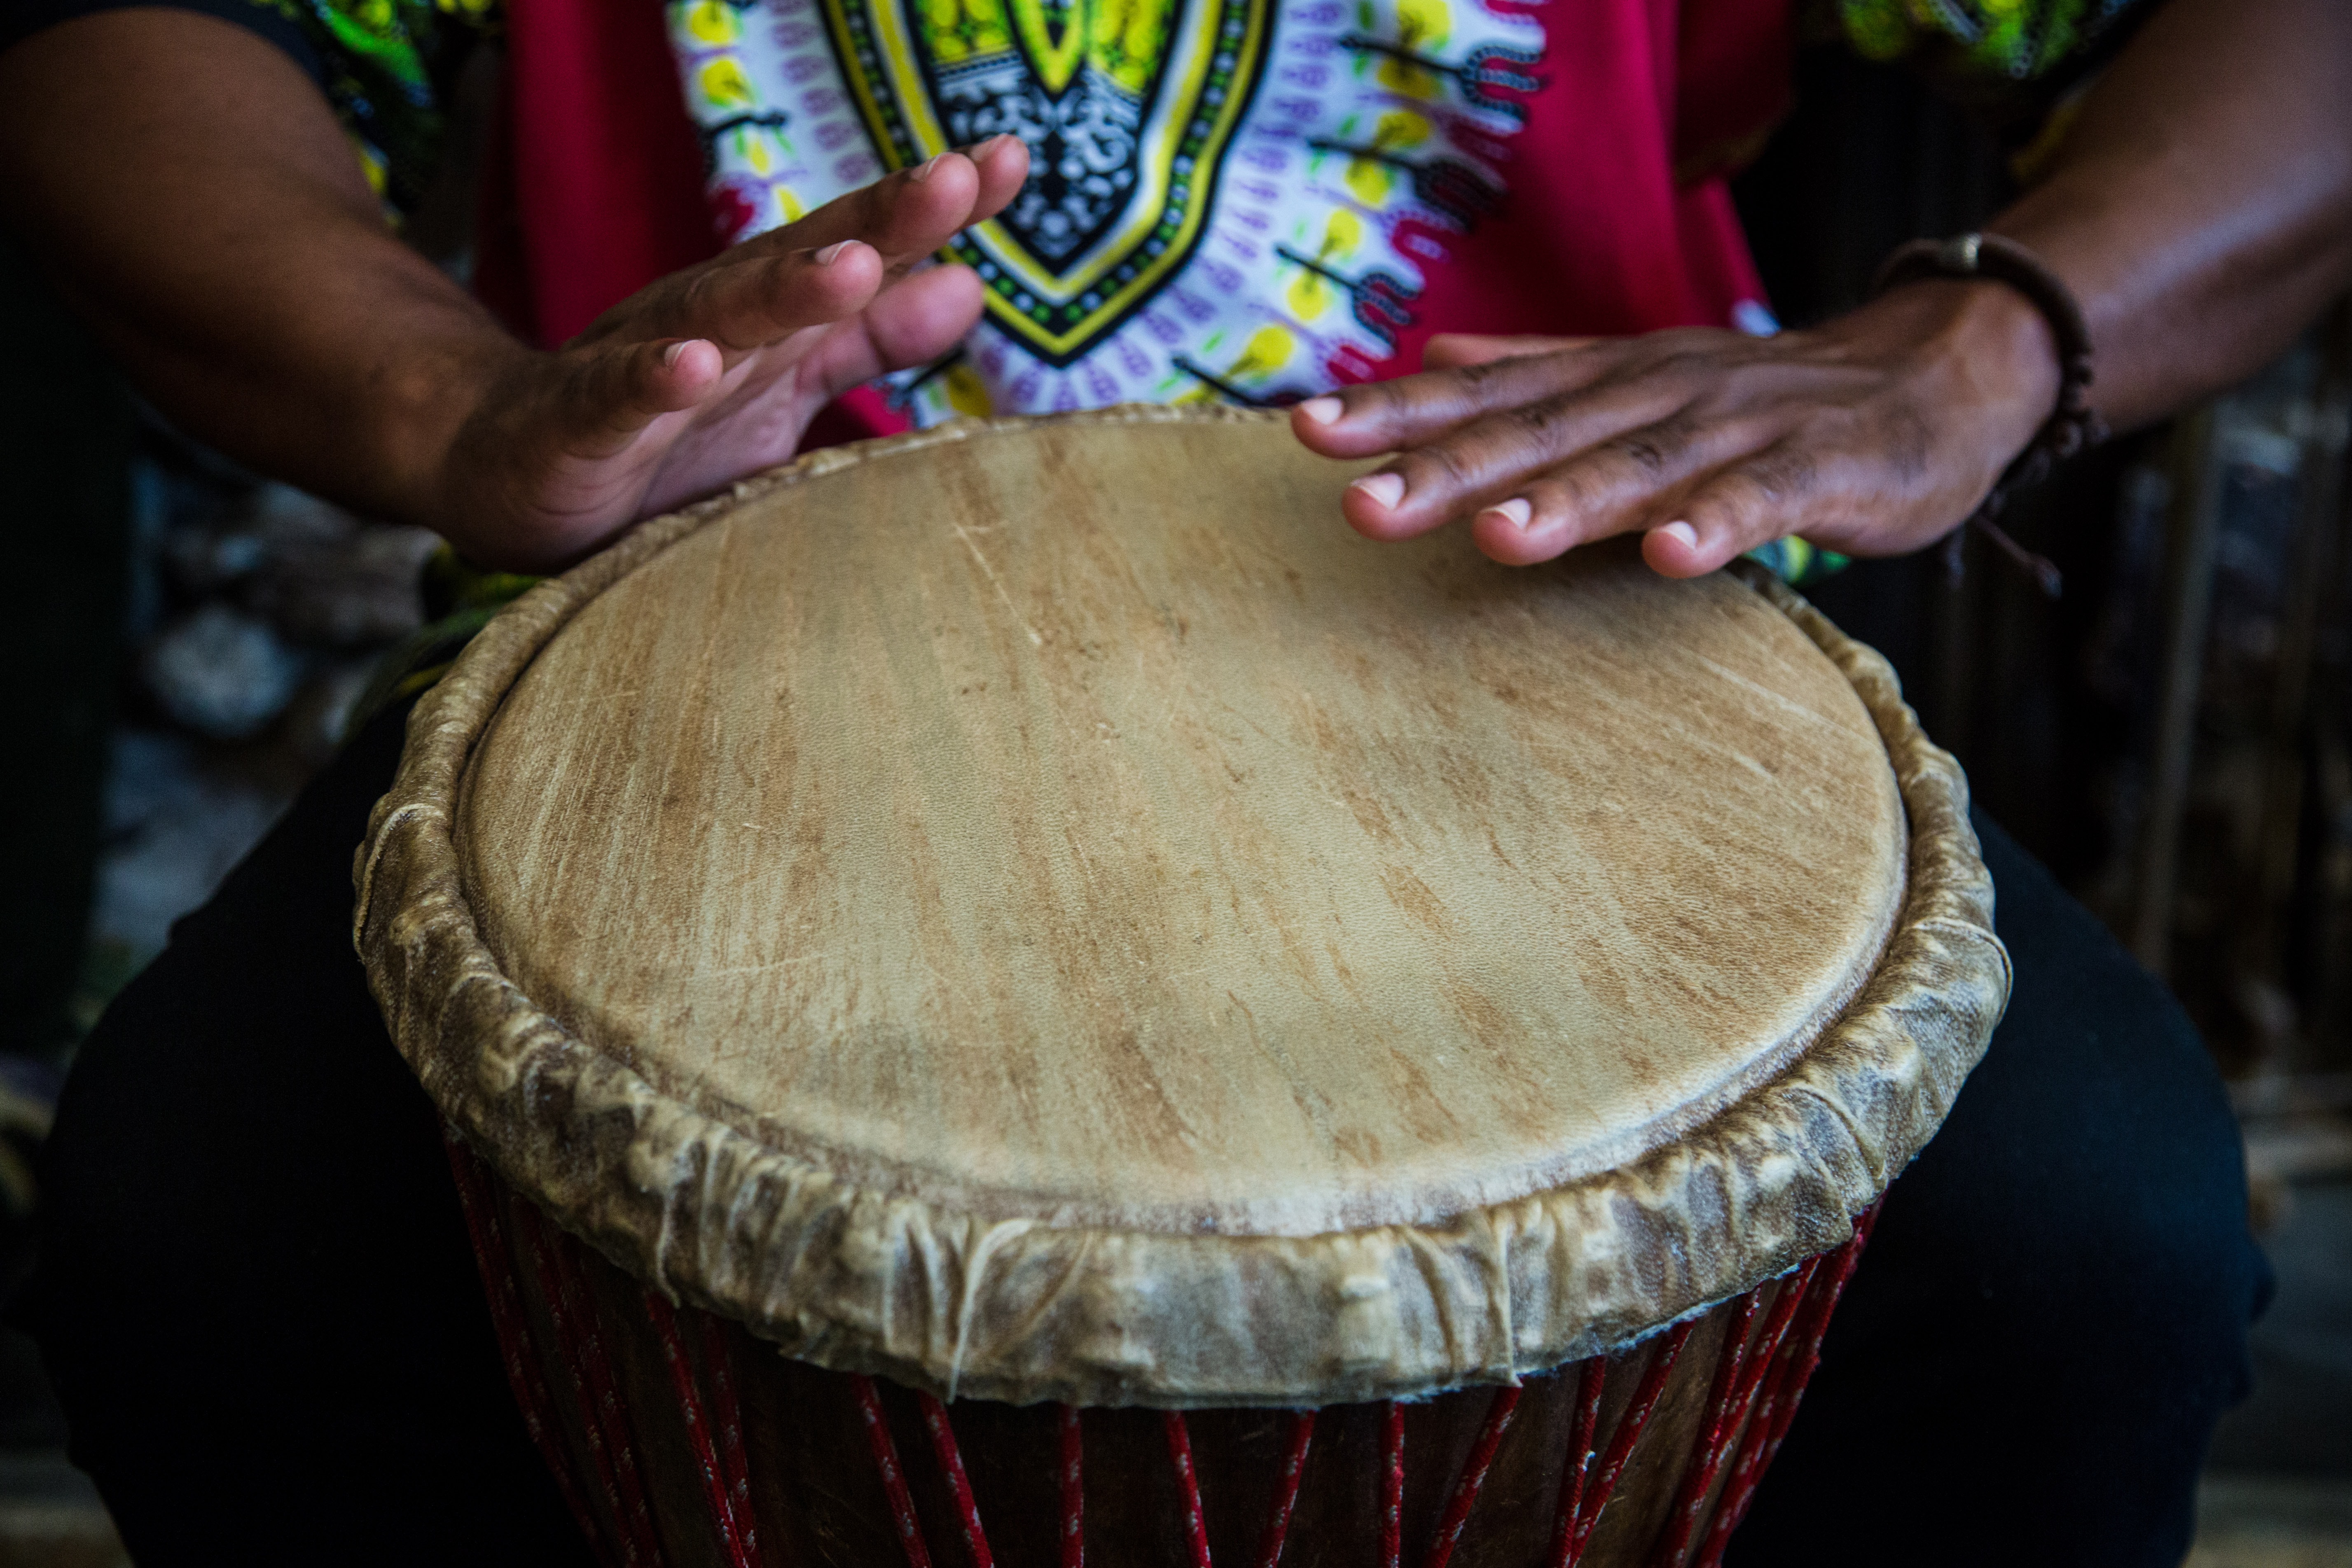 A close up of a pair of hands playing a hand drum